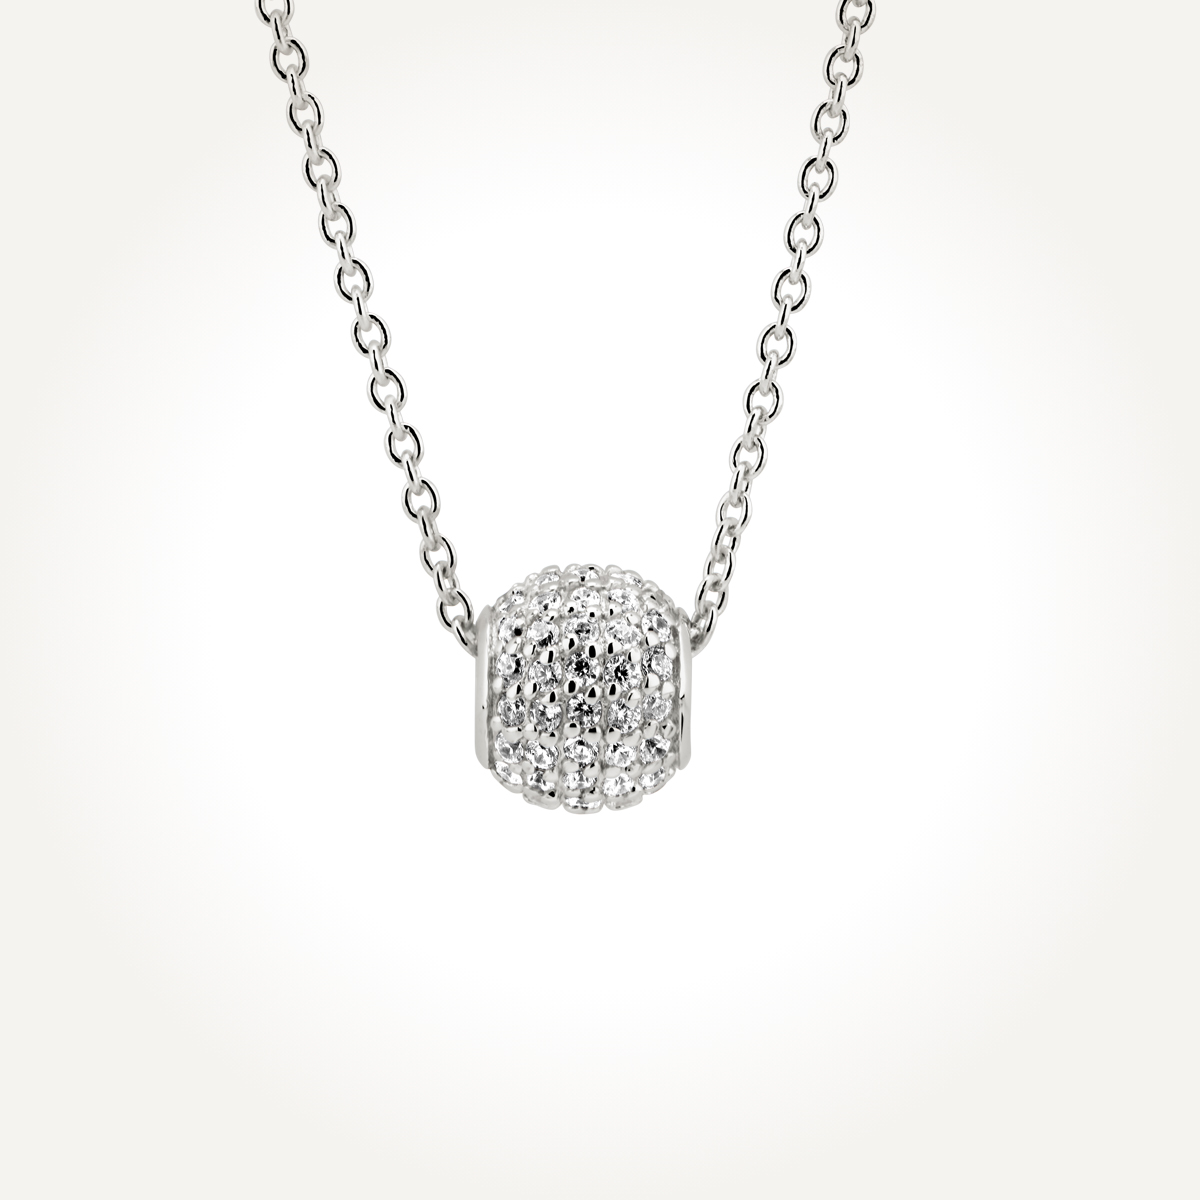 14KT White Gold Diamond Cluster Ball Necklace 0.32 CT. T.W.